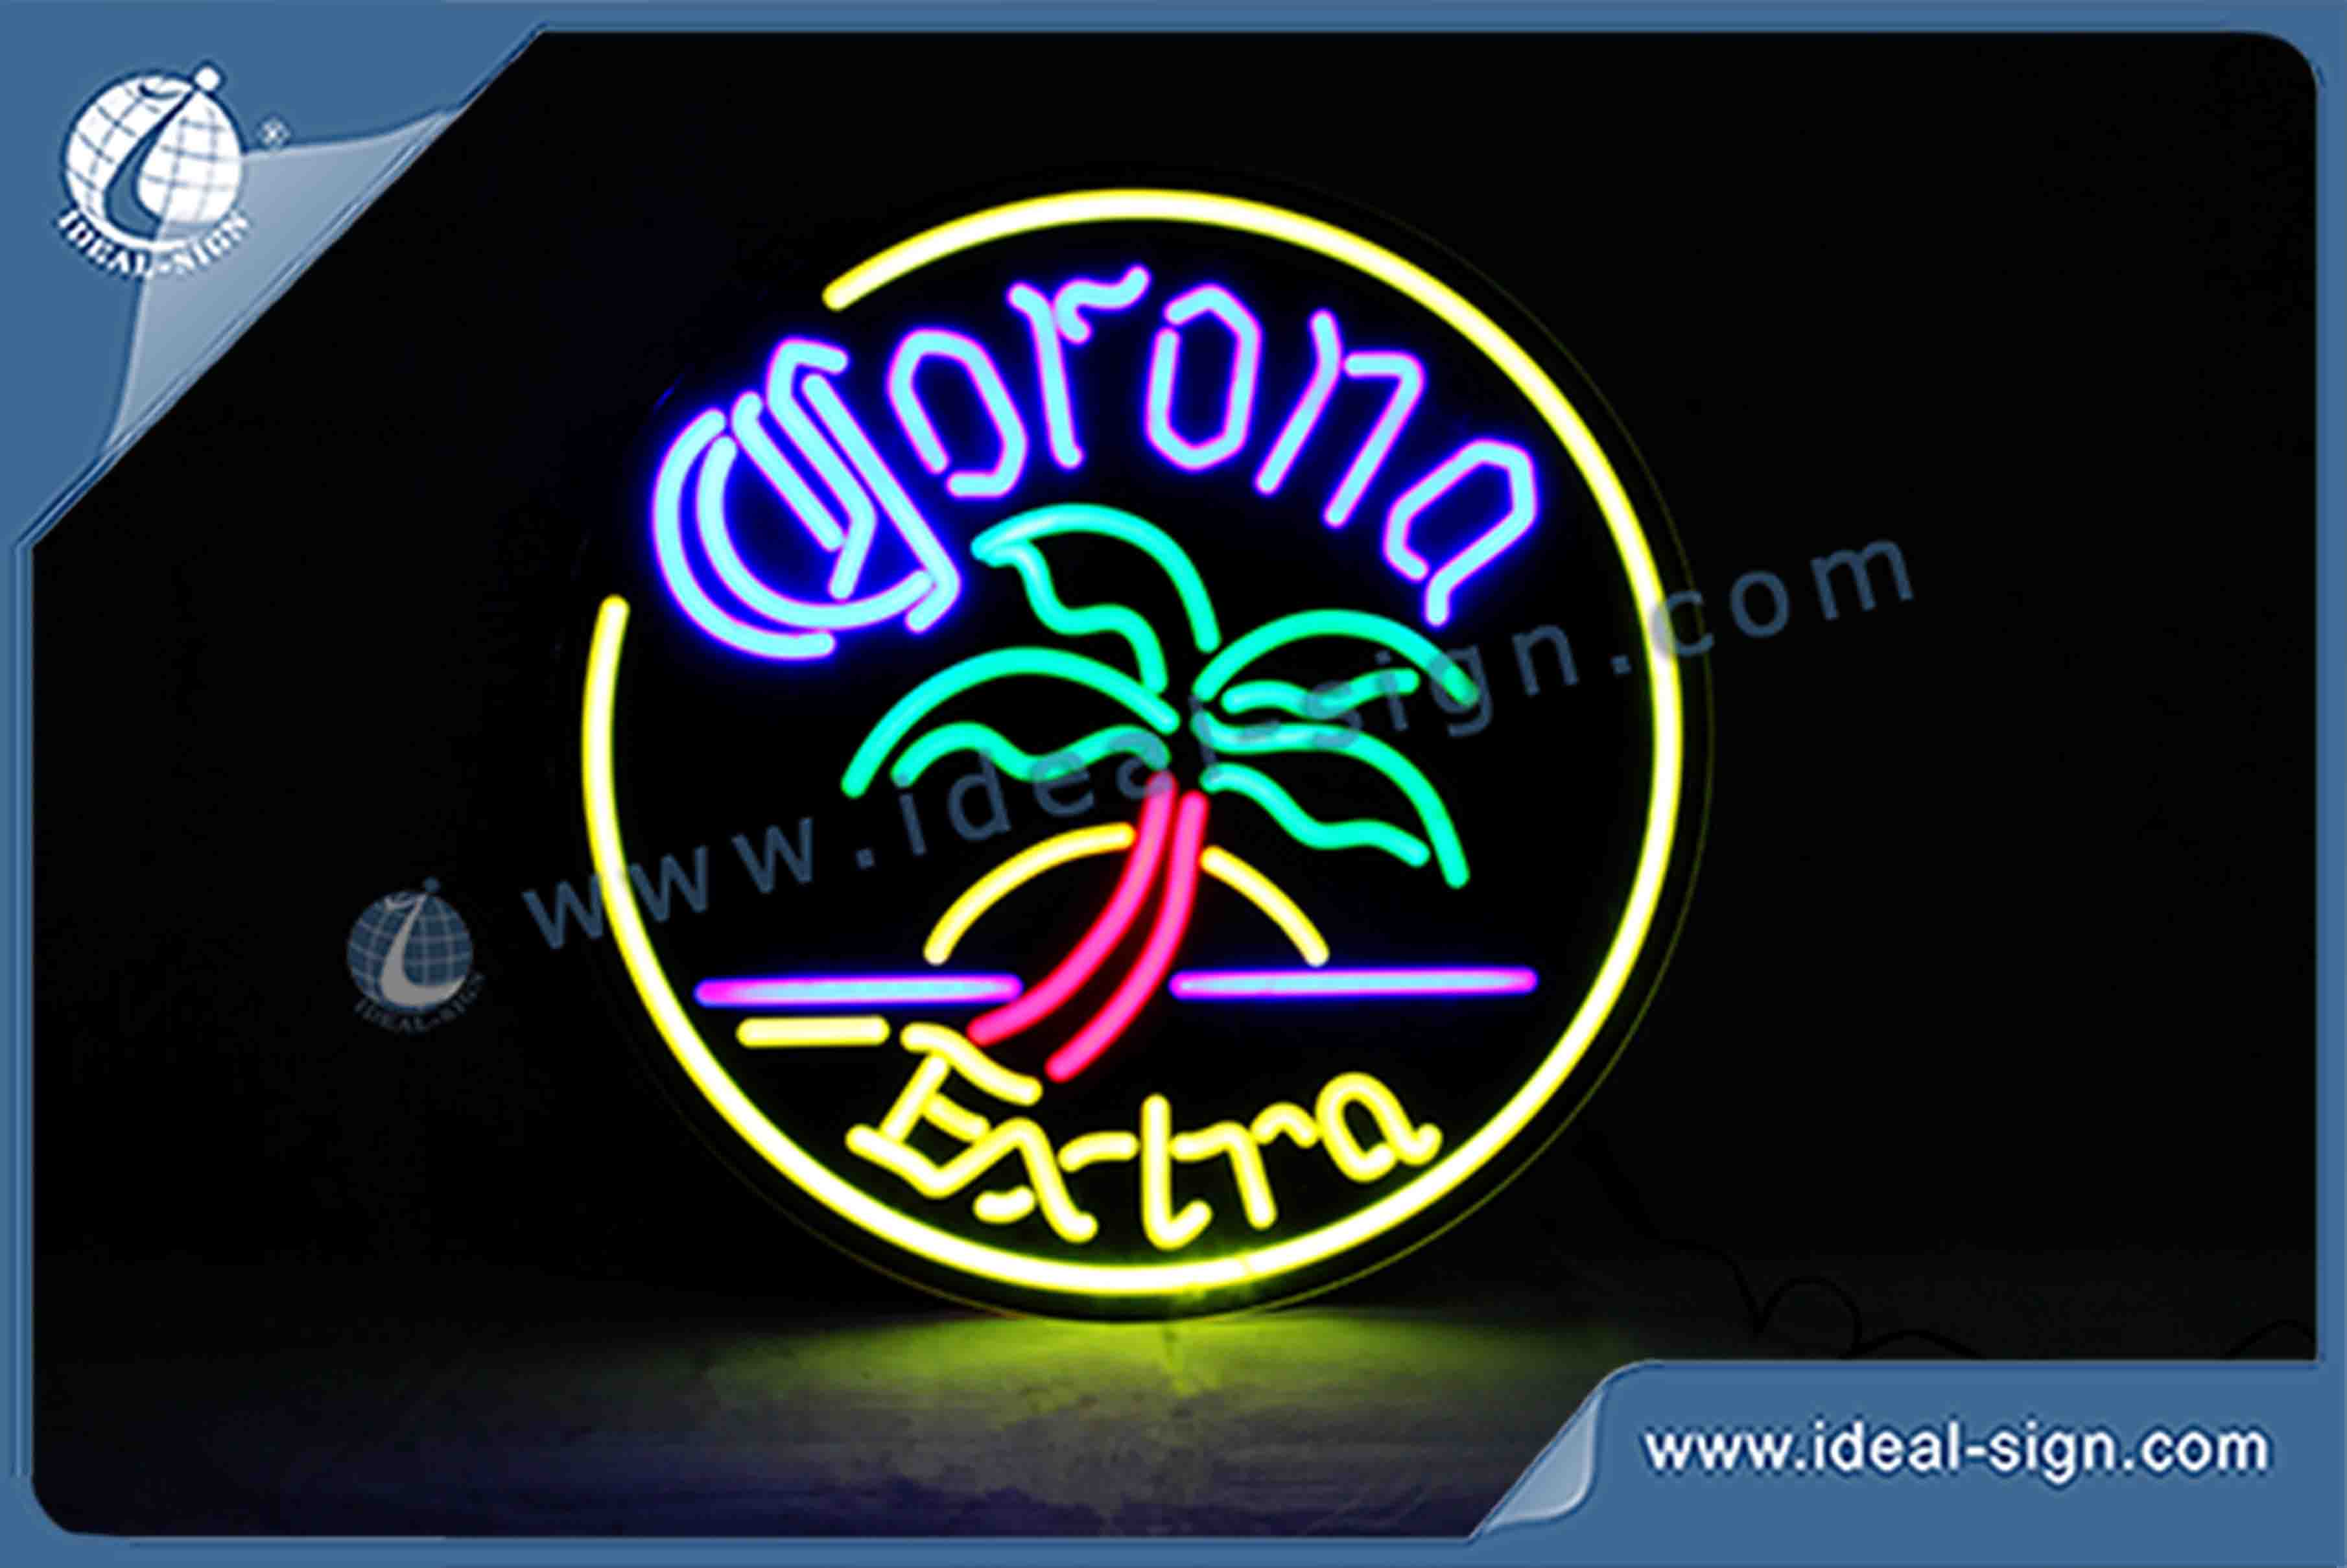 LED neon sign